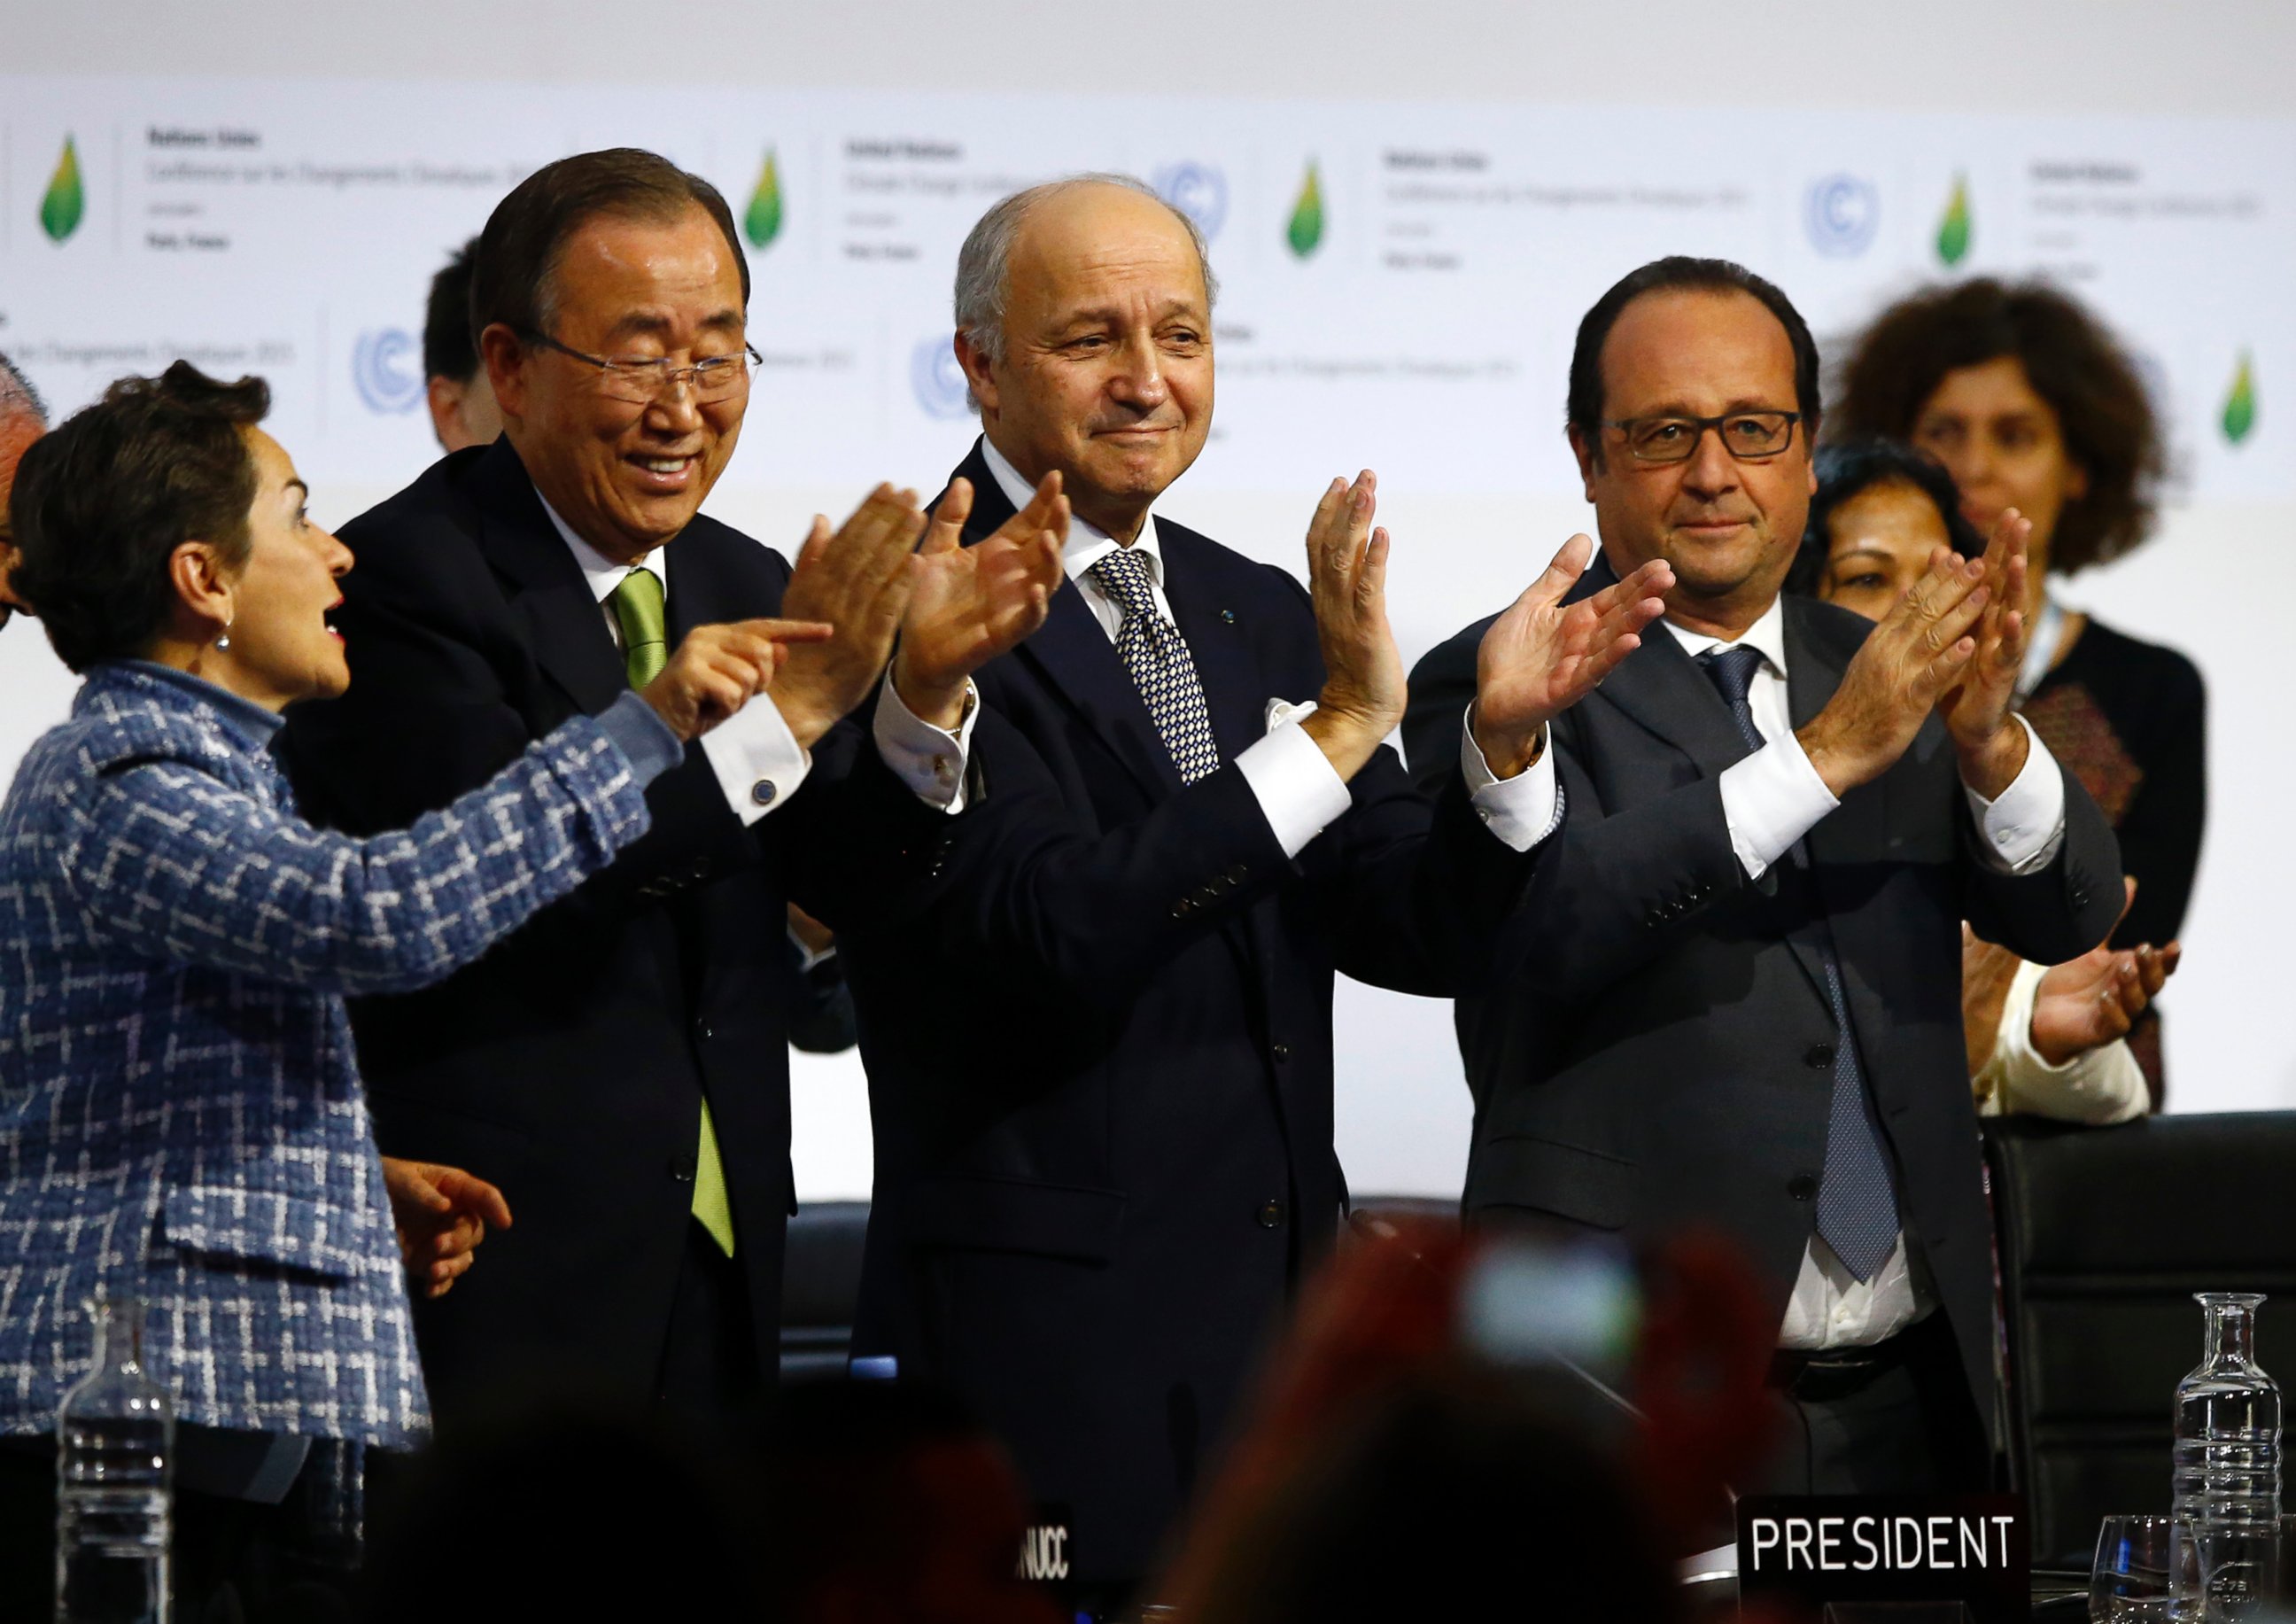 PHOTO: U.N. climate chief Christiana Figueres, U.N. Secretary General Ban ki-Moon, president of the COP21 Laurent Fabius and French President Francois Hollande applaud after the final conference at the COP21, in Le Bourget France, April 22, 2016.